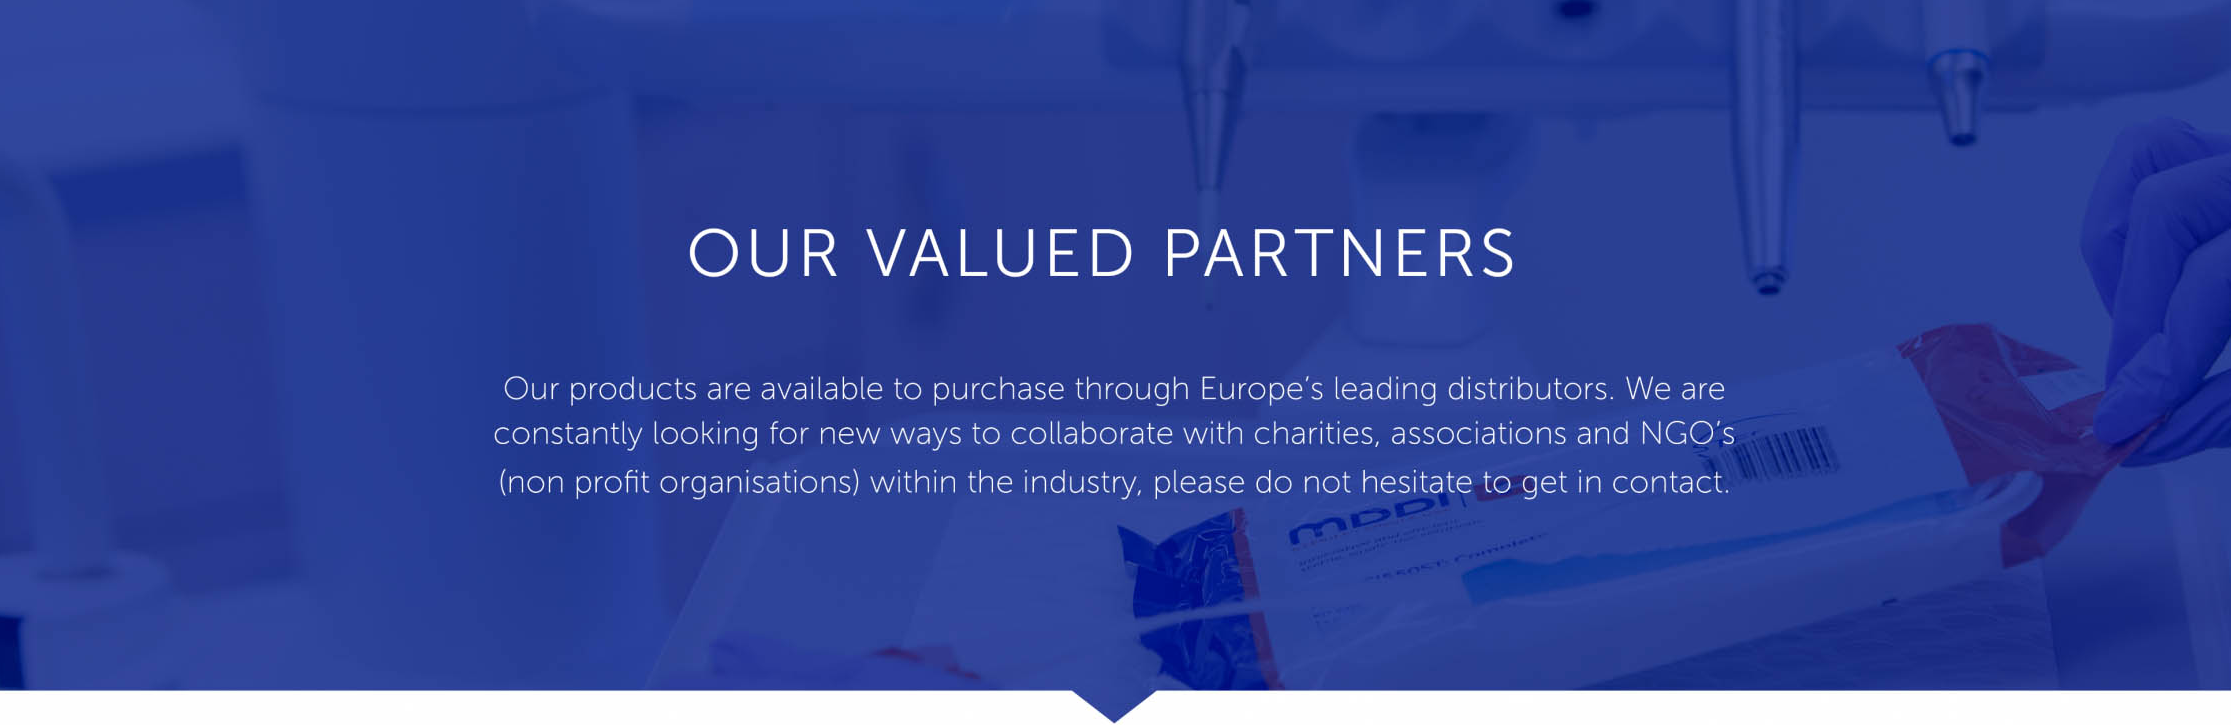 Our Valued Partners